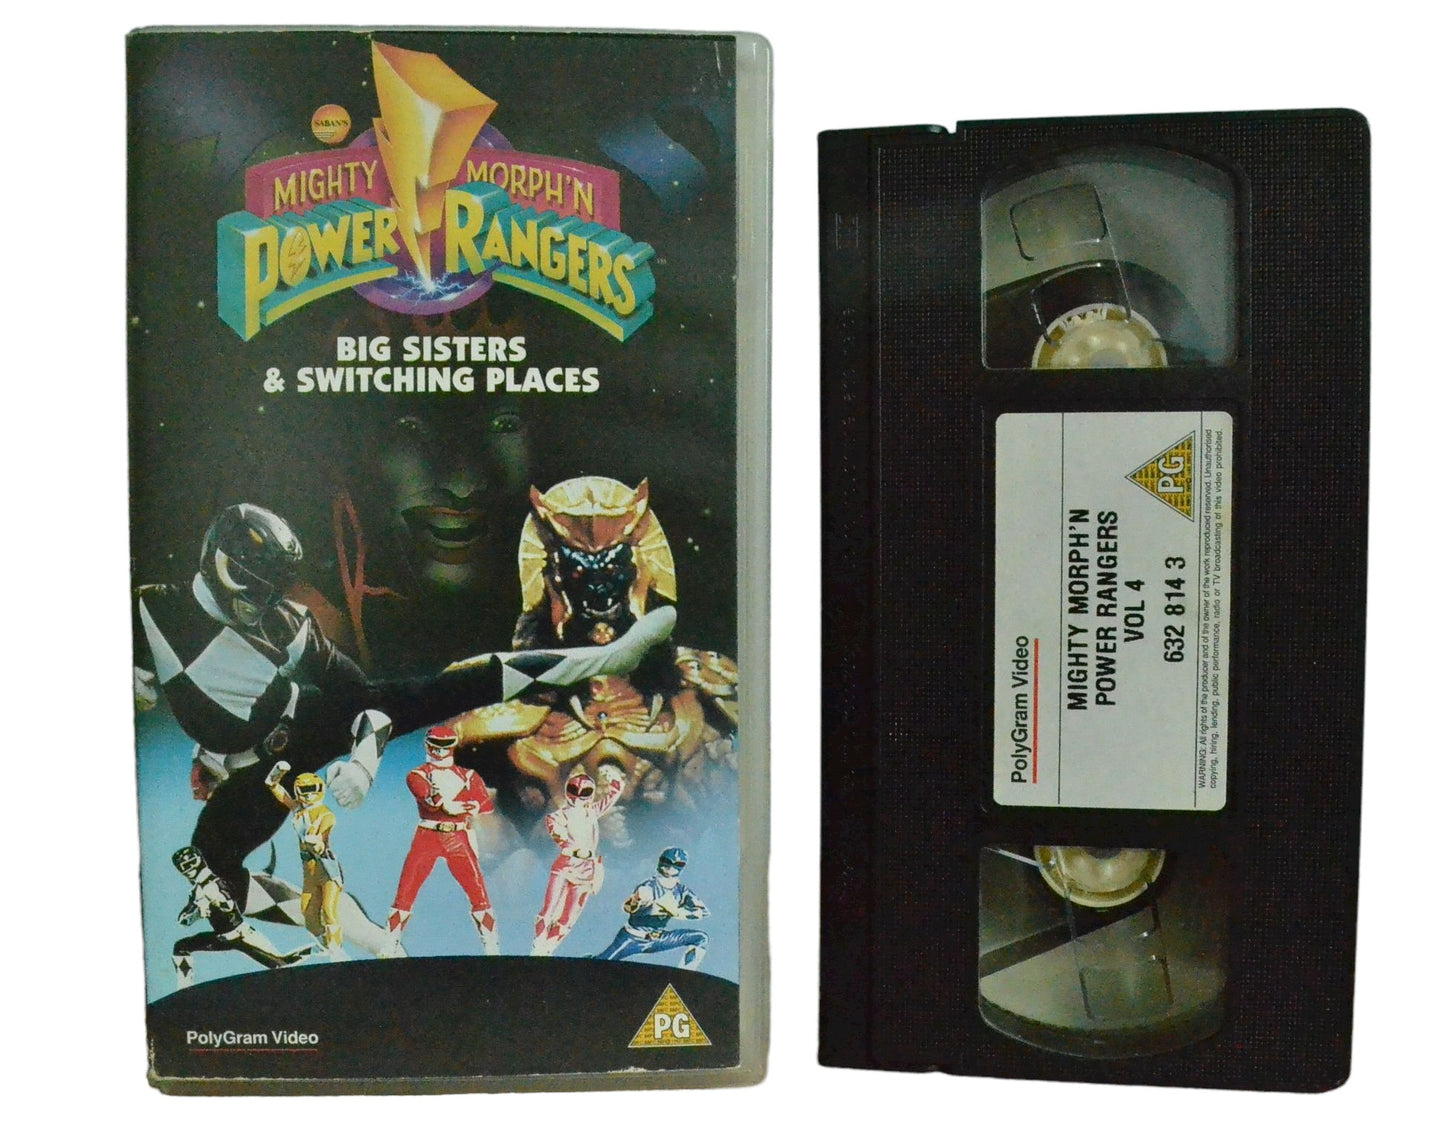 Mighty Morph 'N Power Rangers - Big Sisters & Switching Places - Polygram Video - Childrens - Pal VHS-